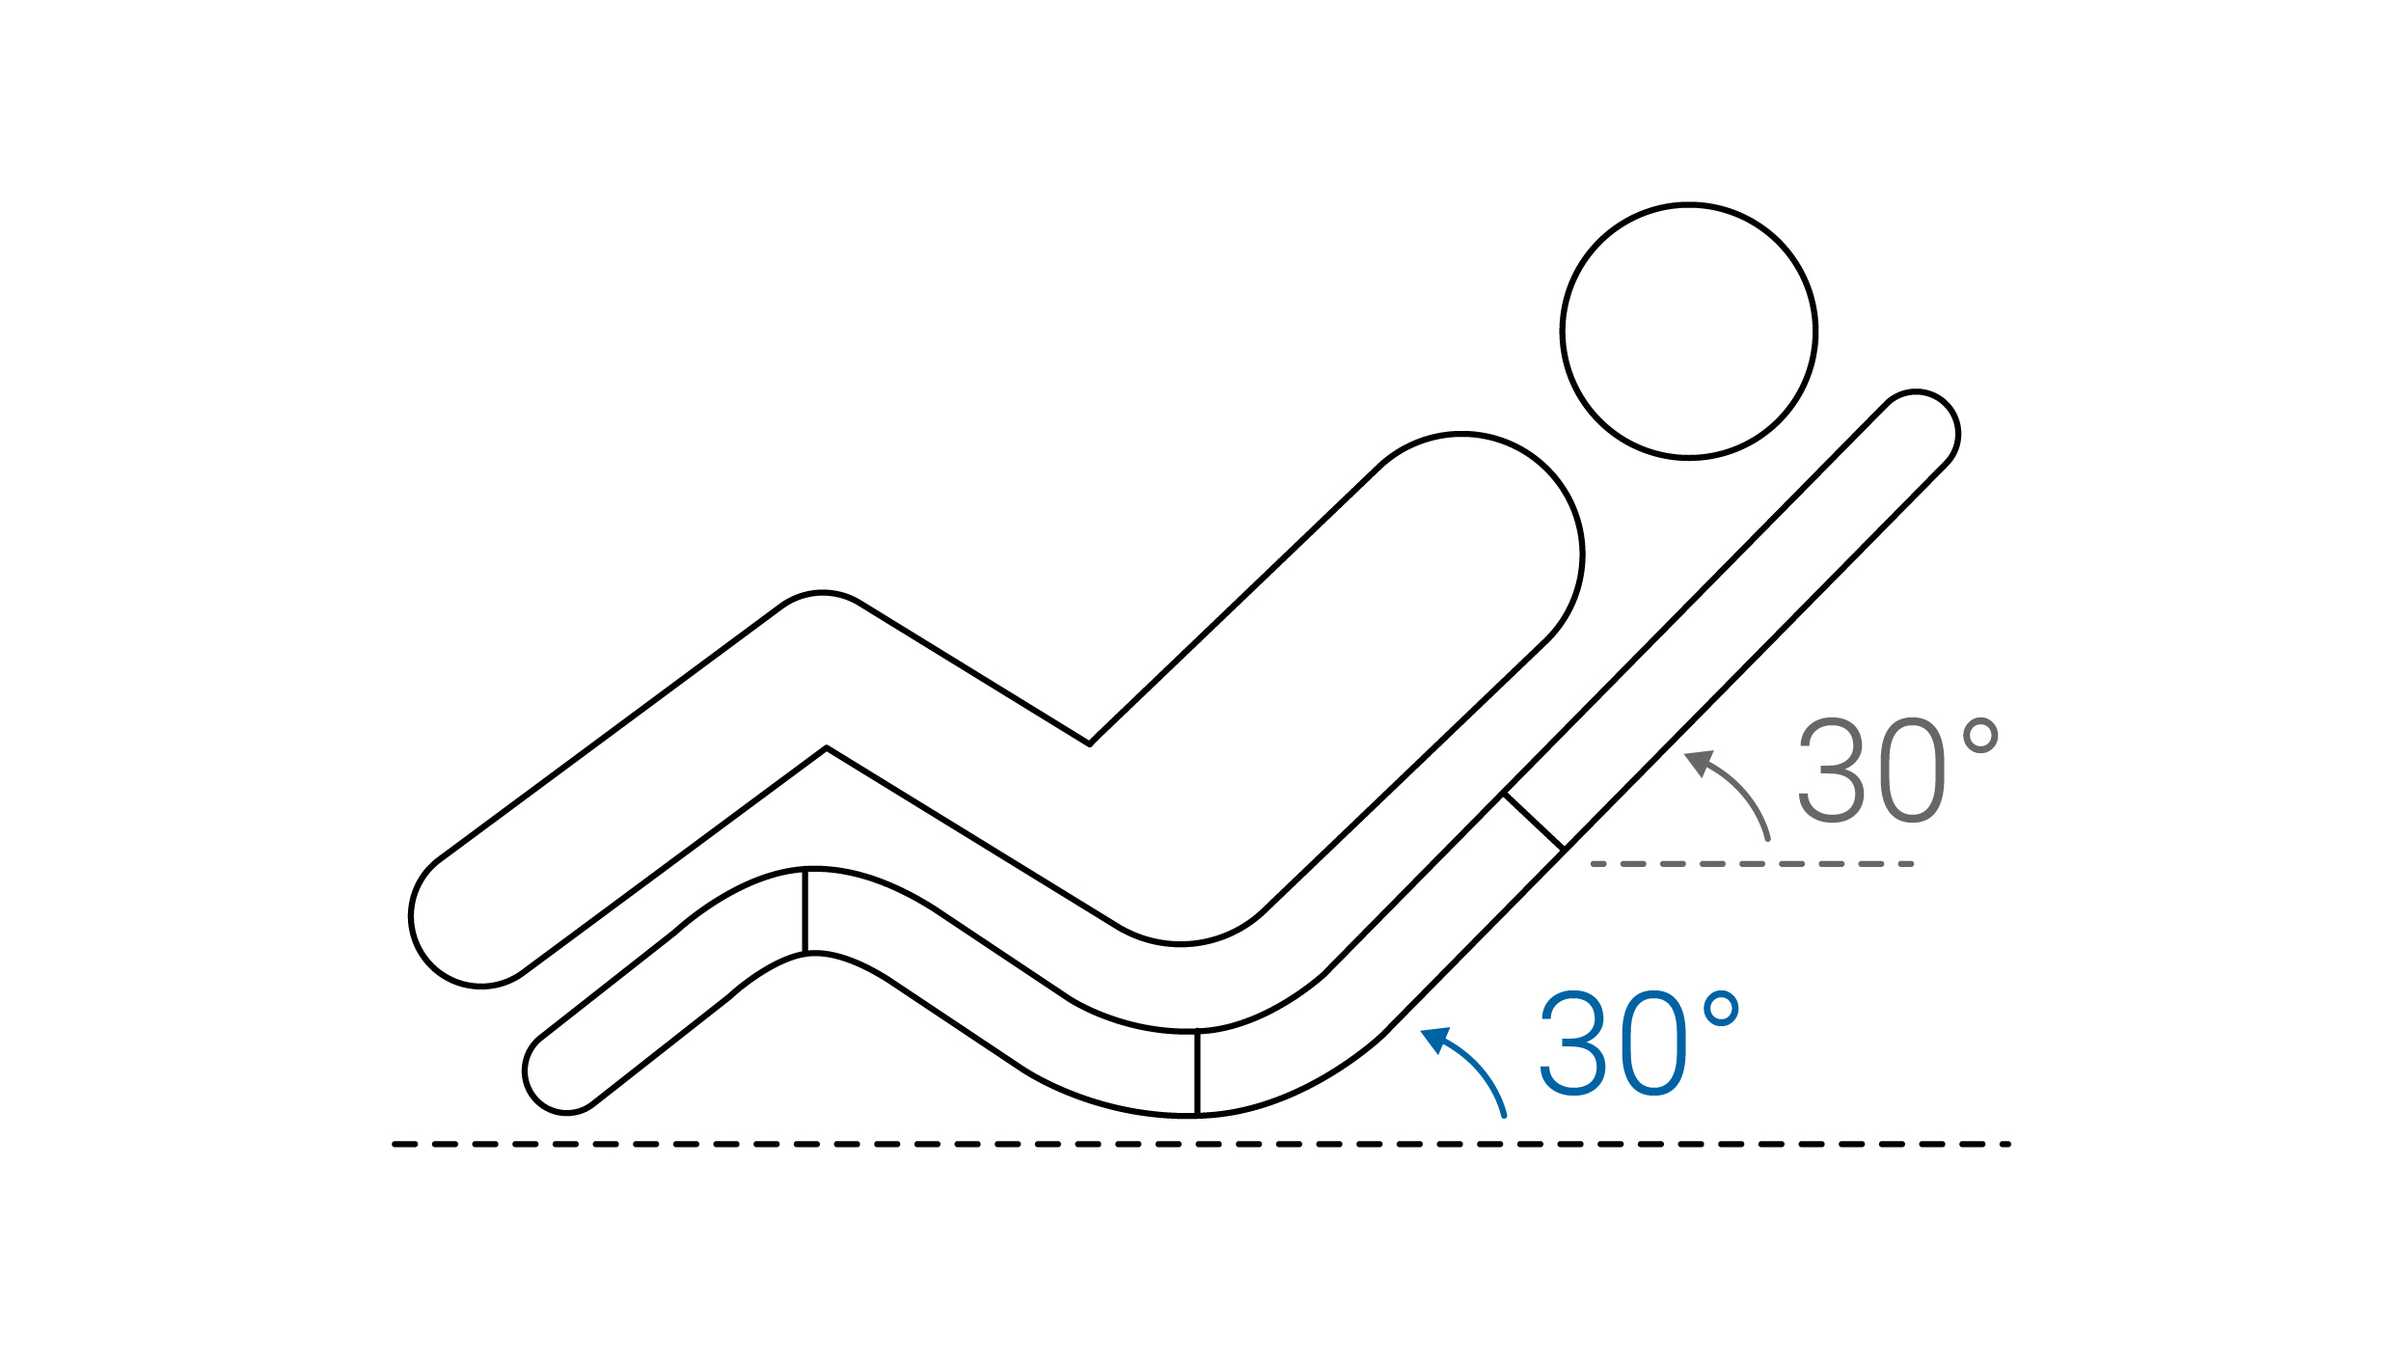 Illustration of a patient in semi-recumbent position